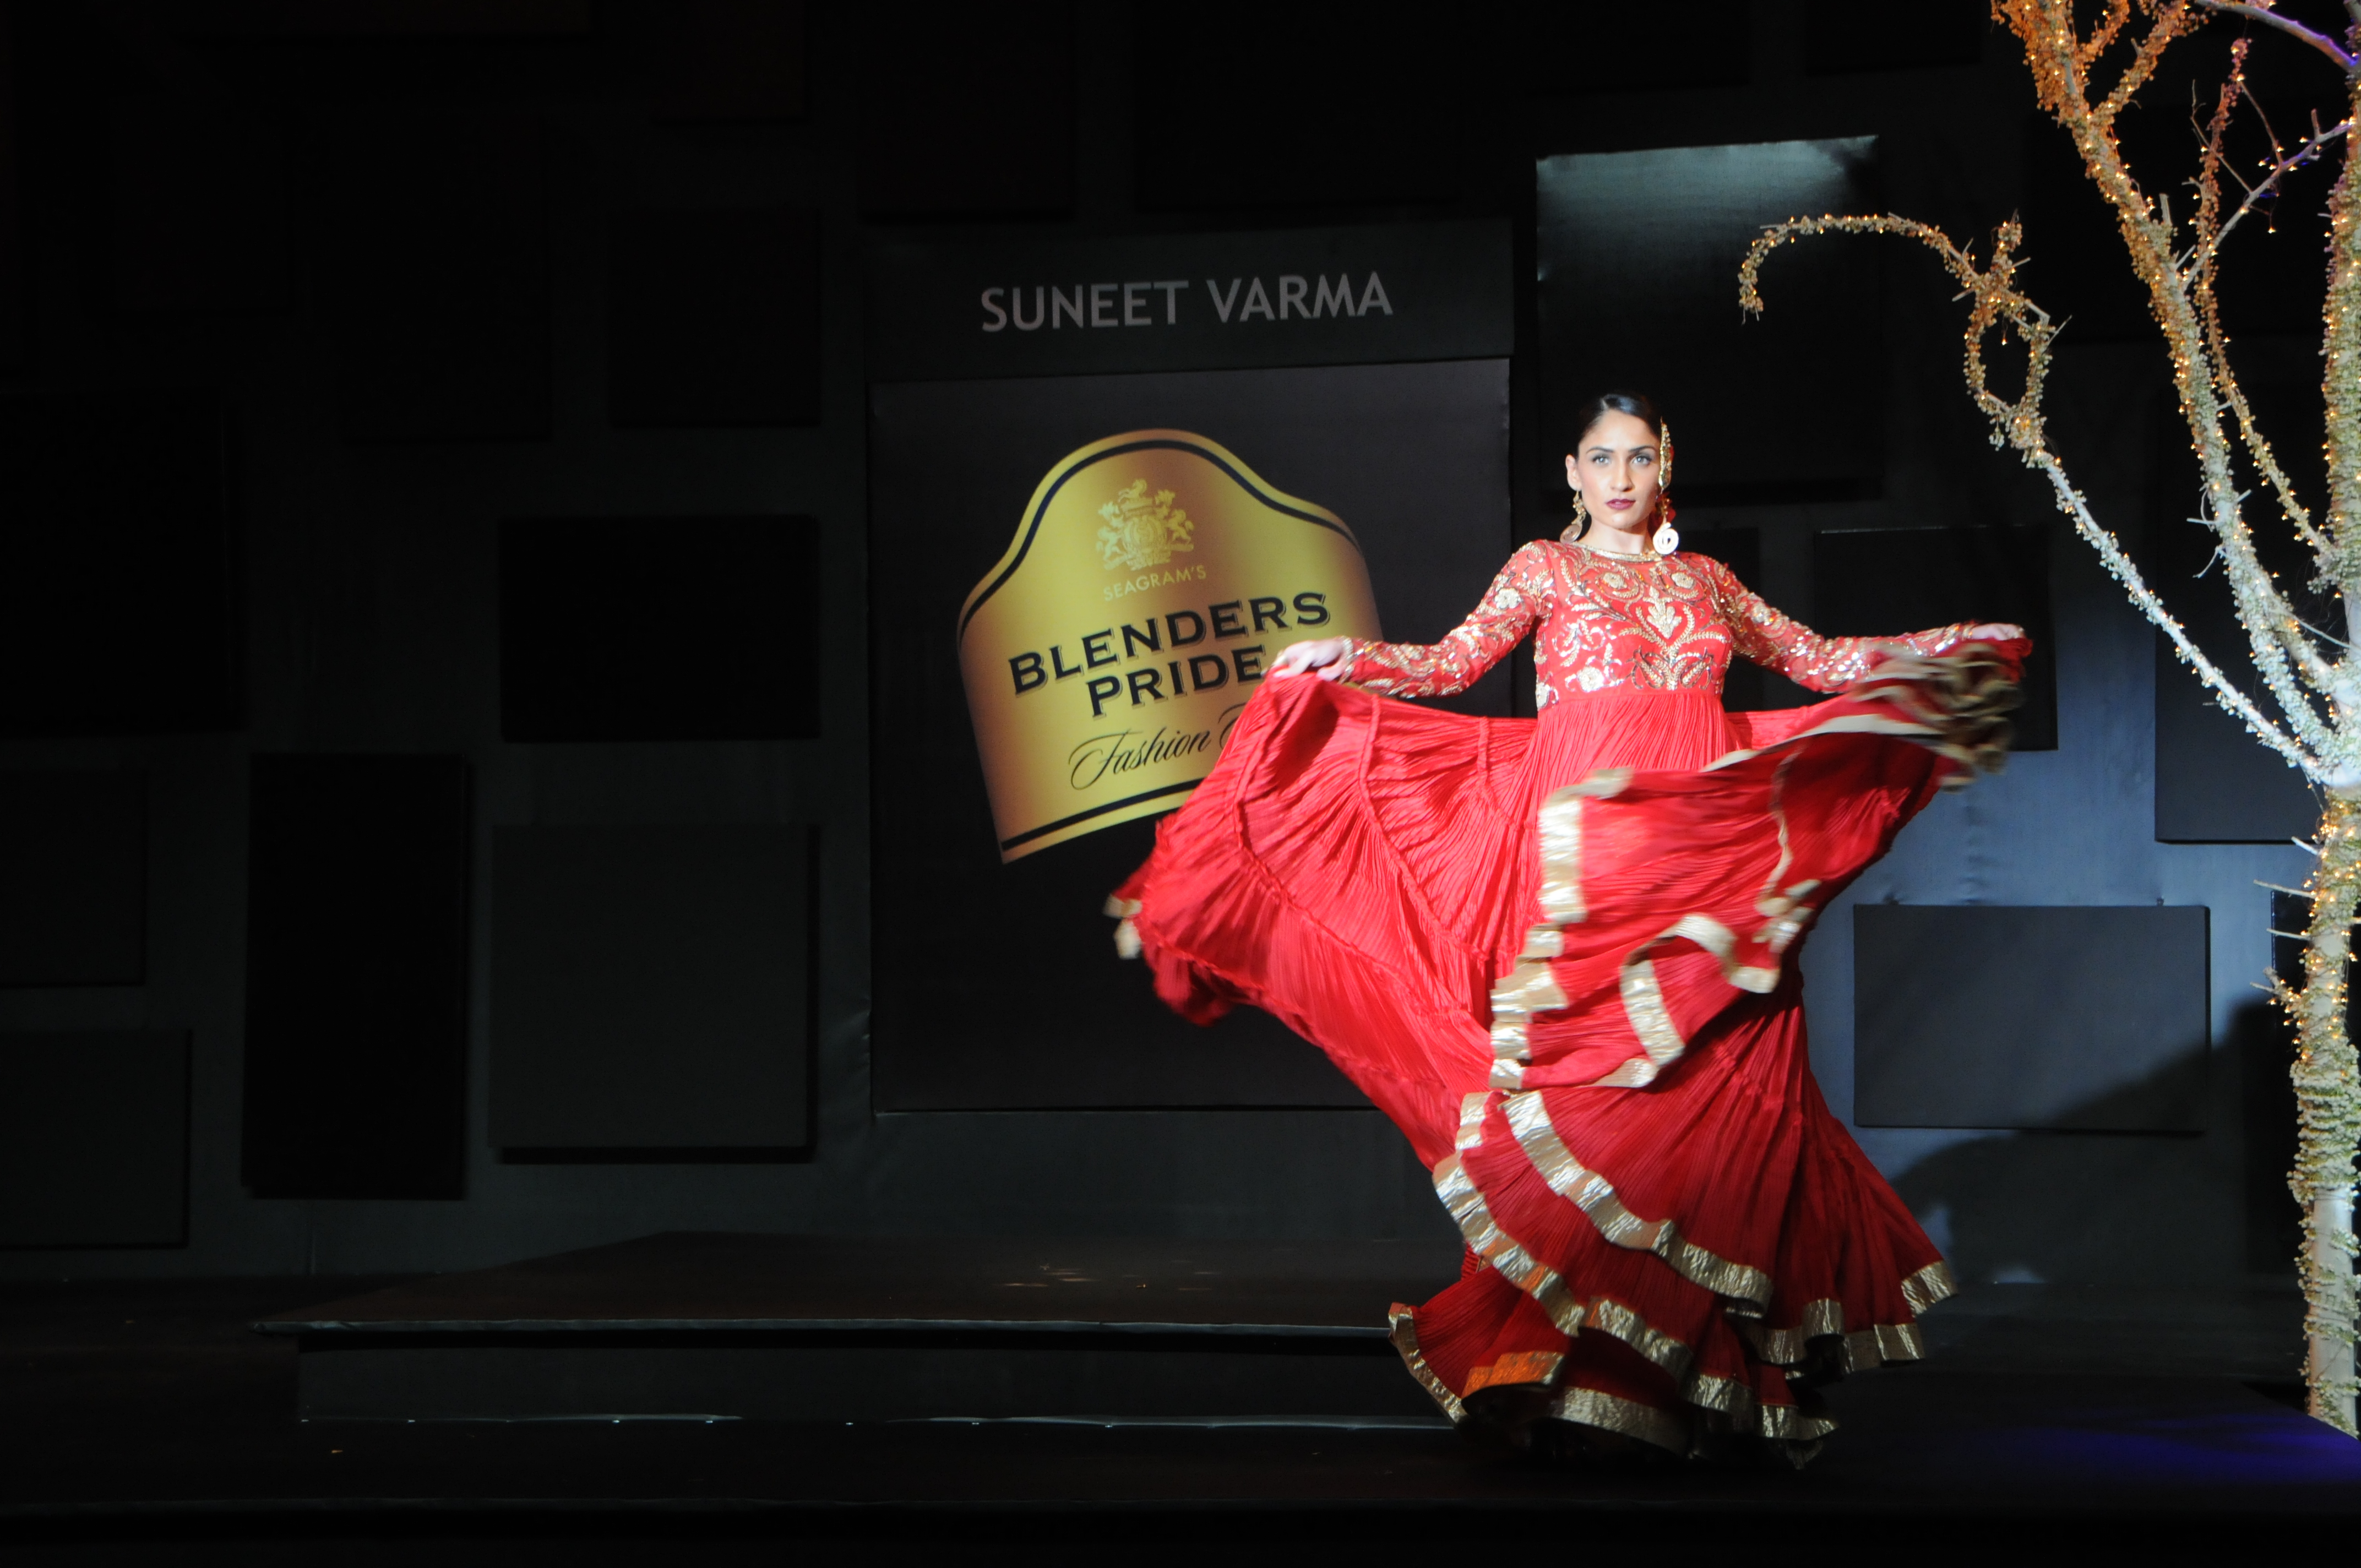 Seen at Blenders Pride Fashion Tour Day - 1 - Model in a Suneet Varma outfit